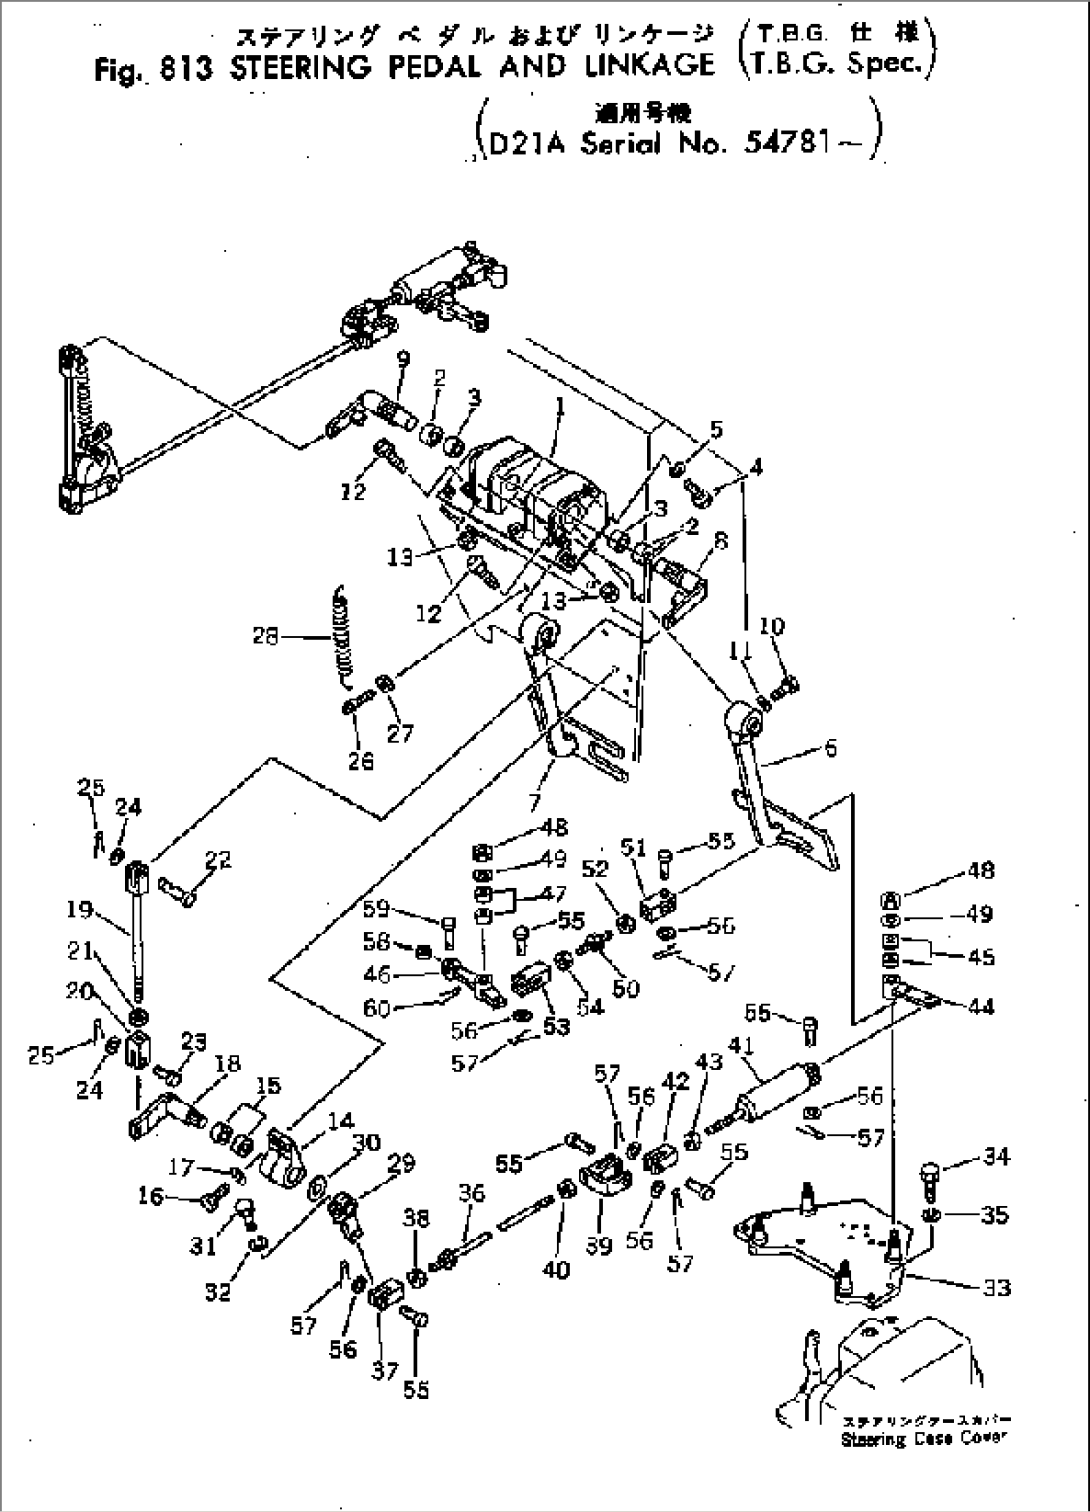 STEERING PEDAL AND LINKAGE (TBG SPEC.)(#54781-)